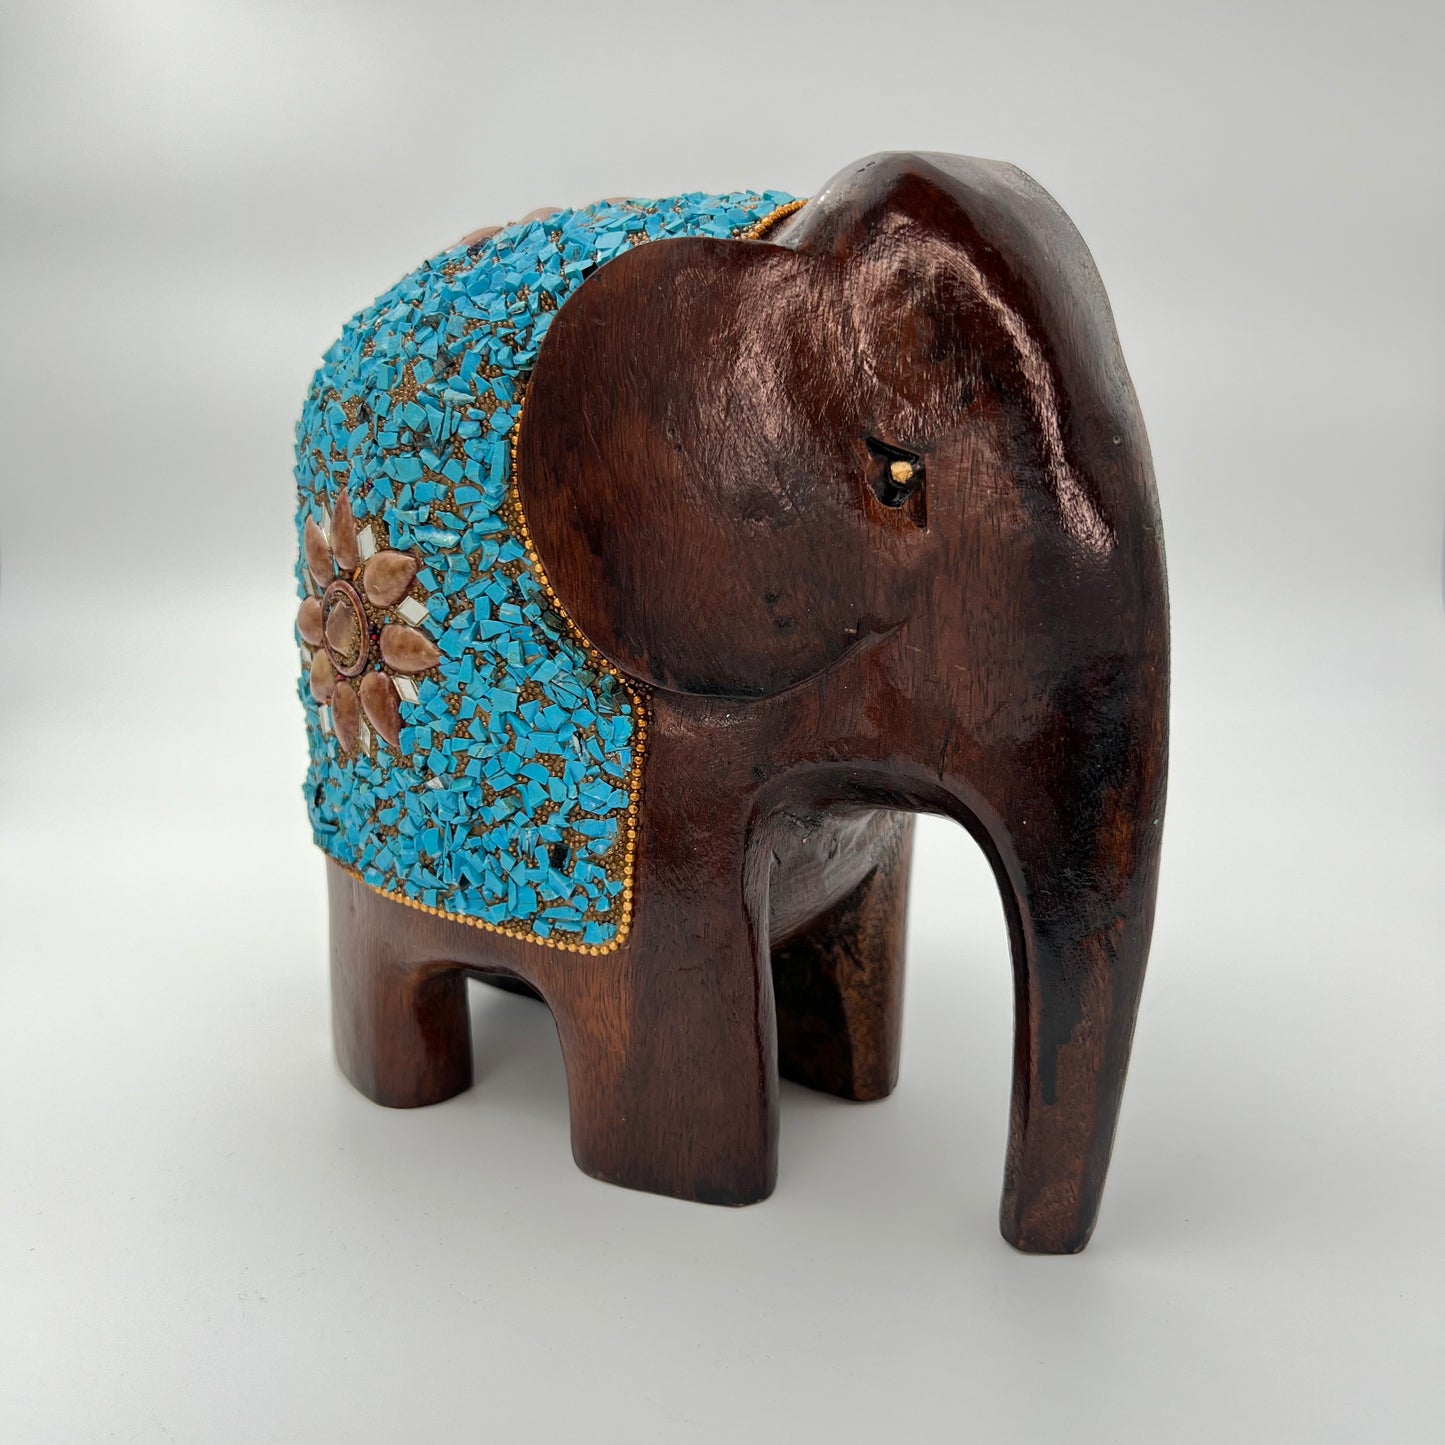 Image of Wooden Elephant with Turquoise Stone Work.  The Source India is an Indian Handicraft, Home Decor, Furnishing and Textiles Store. Our Mission is to allow the enhancement of India's Culture